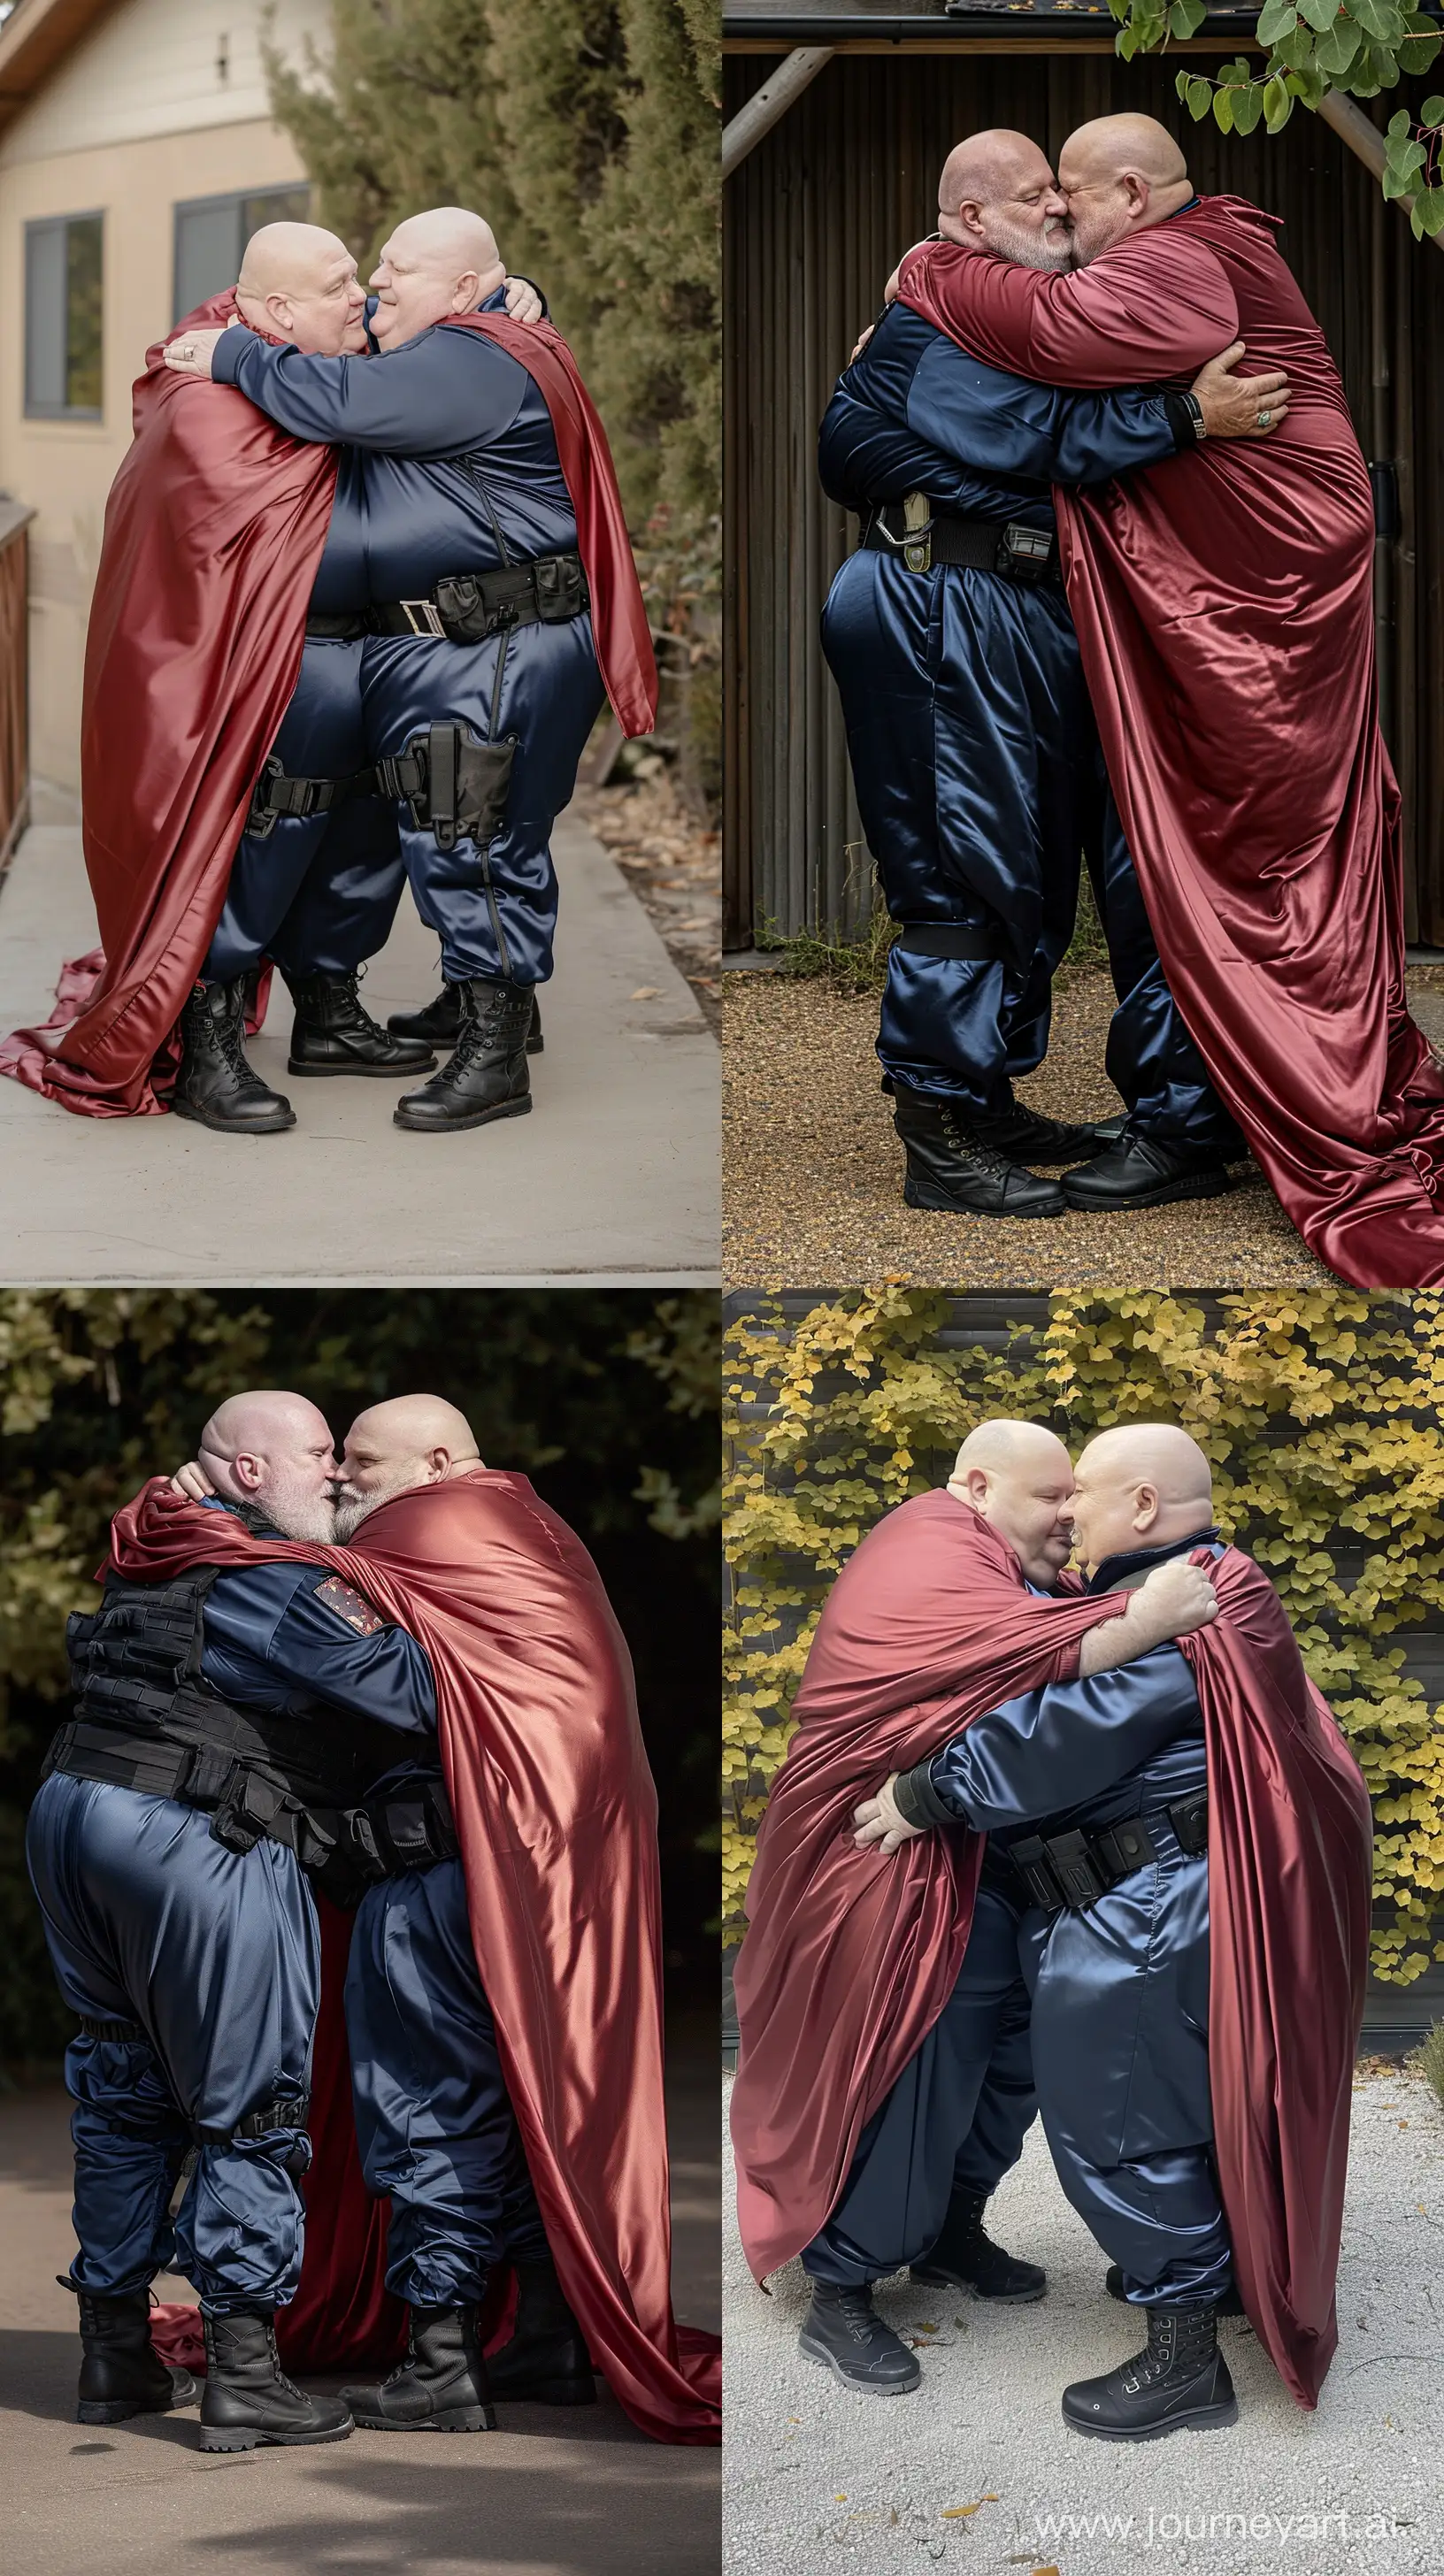 Elderly-Companions-Embrace-in-Stylish-Red-Capes-and-Navy-Tracksuits